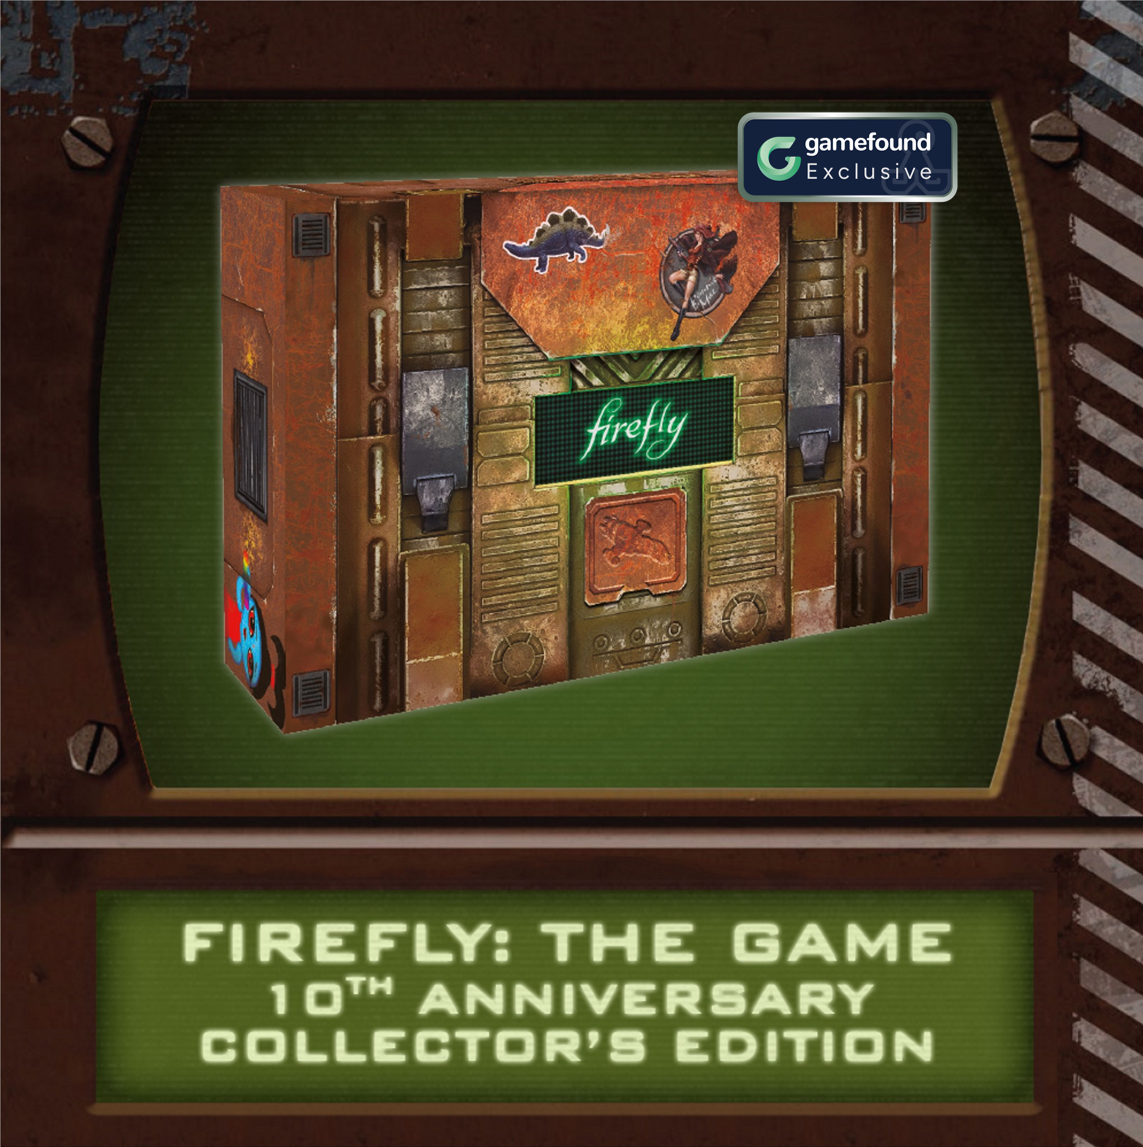 Gamefound Exclusive Firefly: The Board Game 10th Anniversary Collector's Edition